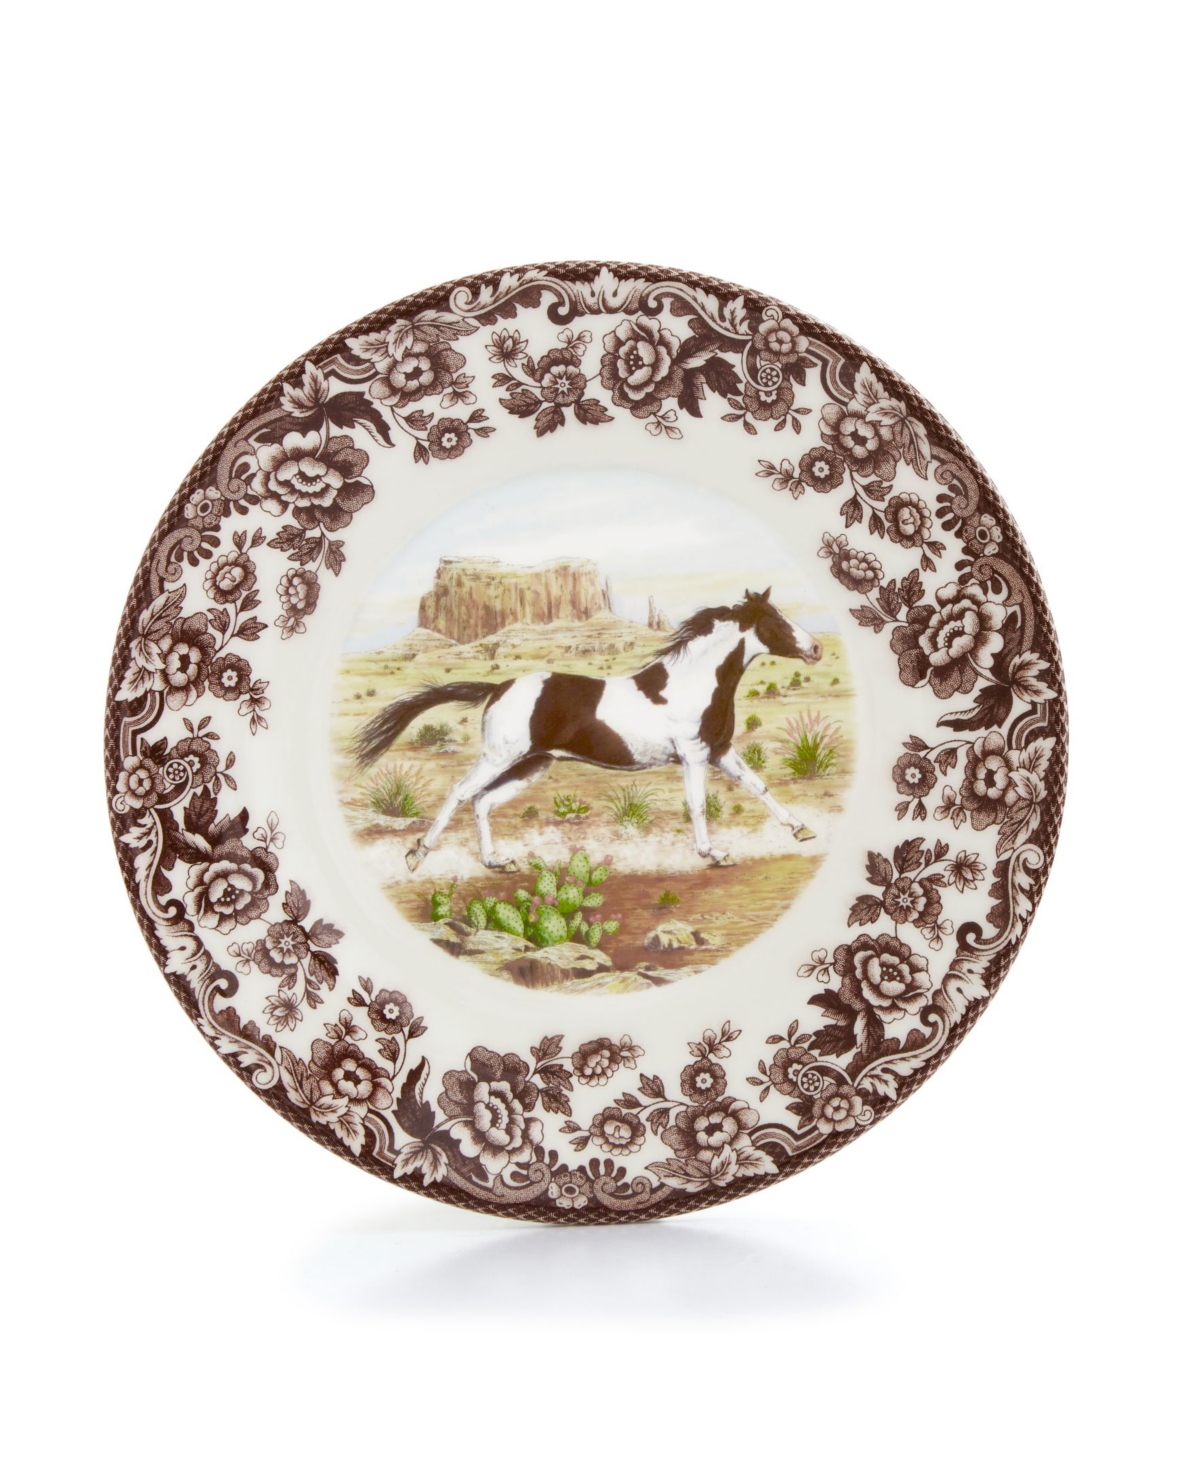 Paint Horse Salad Plate - Brown